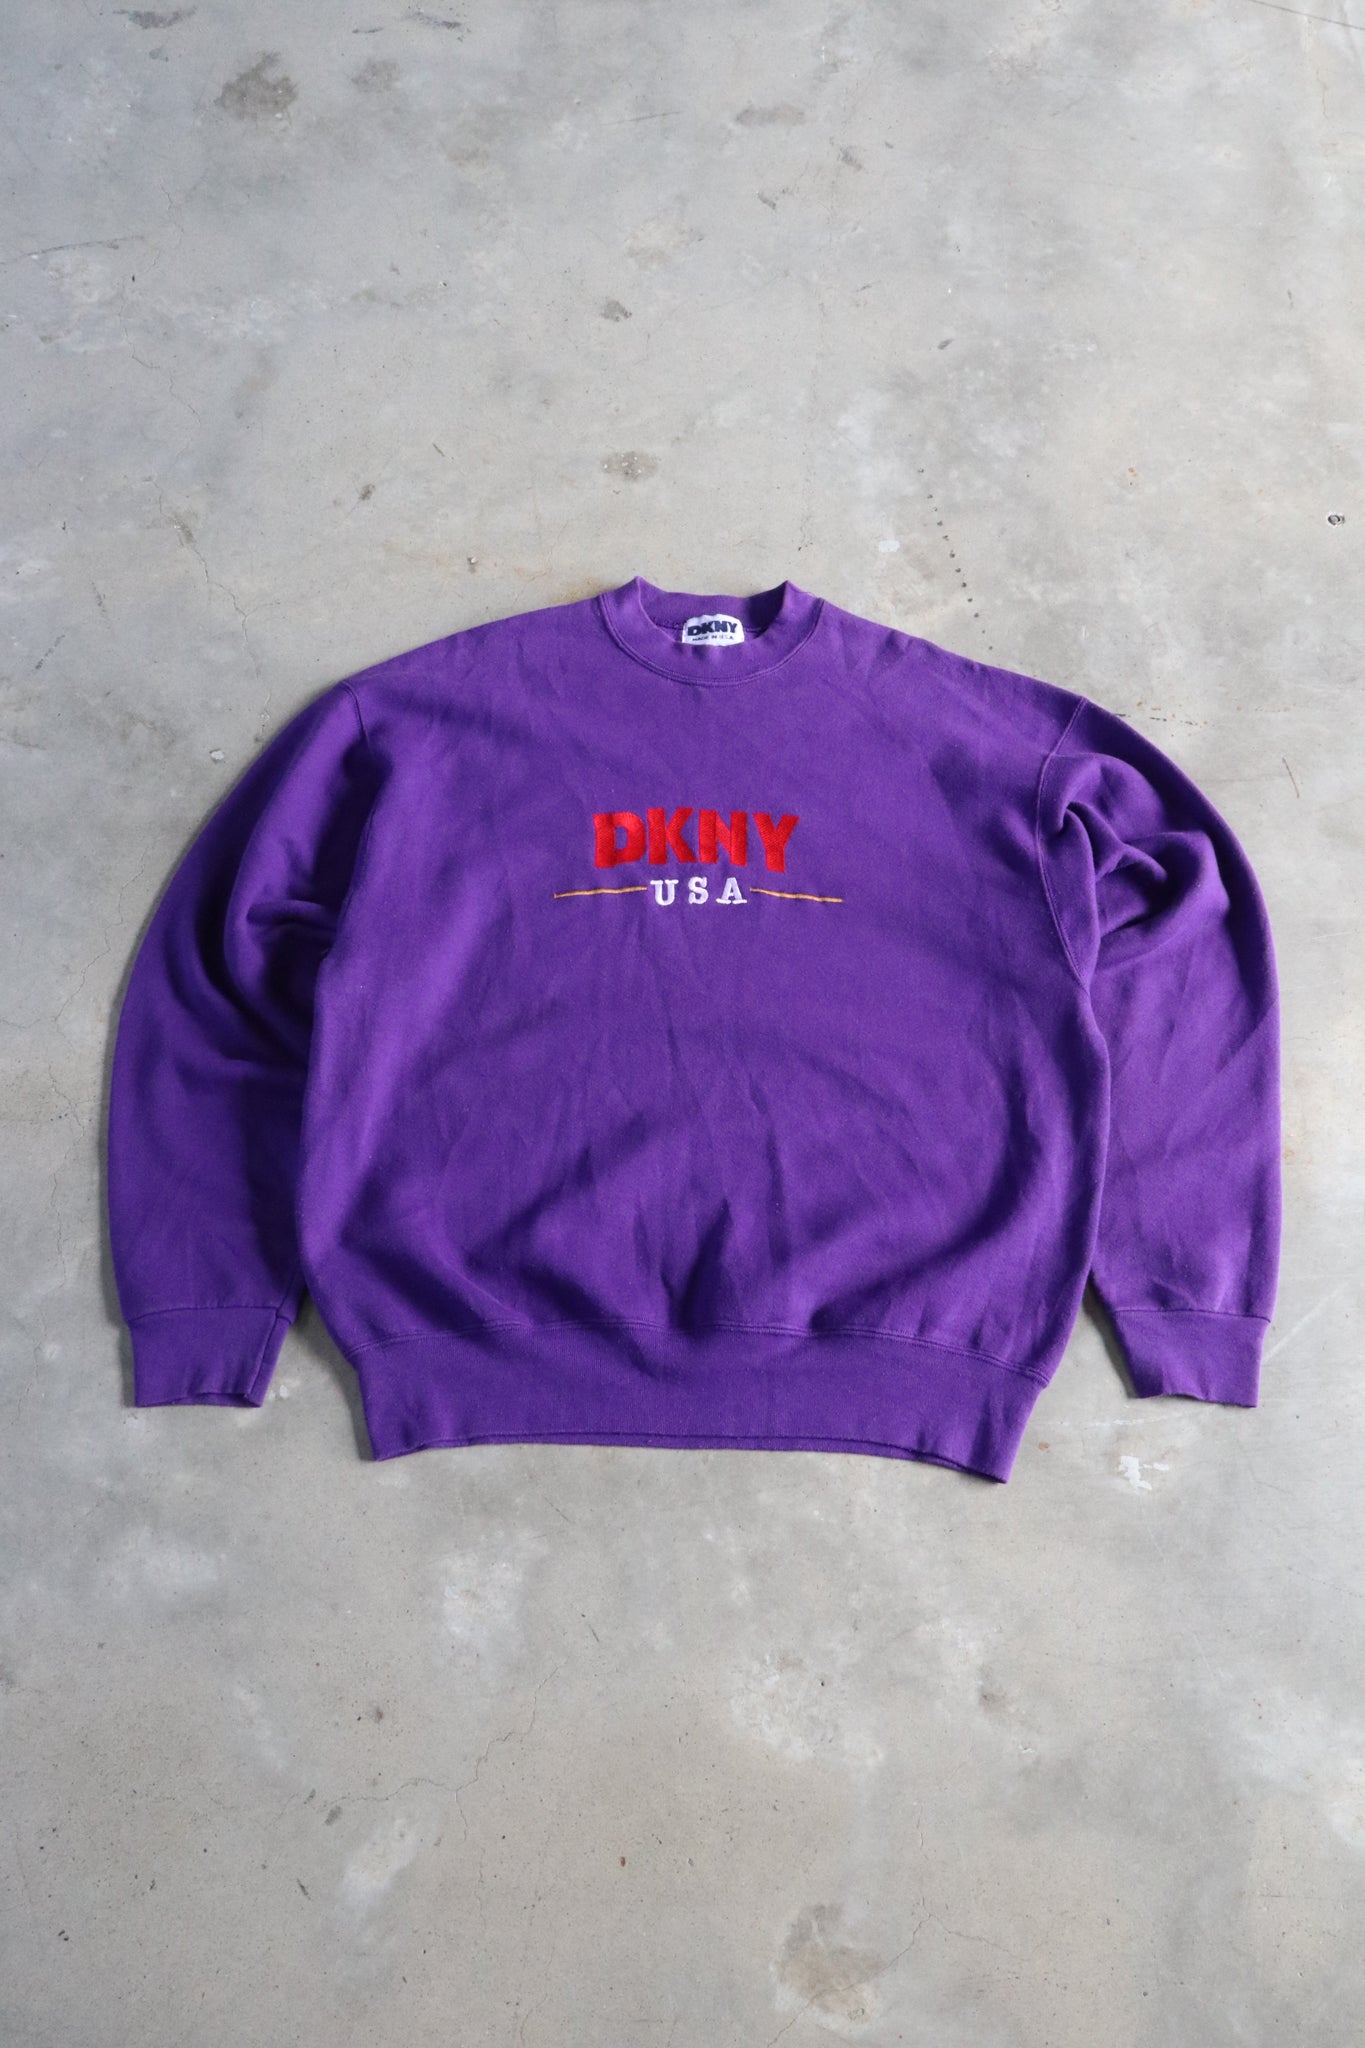 Vintage DKNY USA Embroided Sweater XL